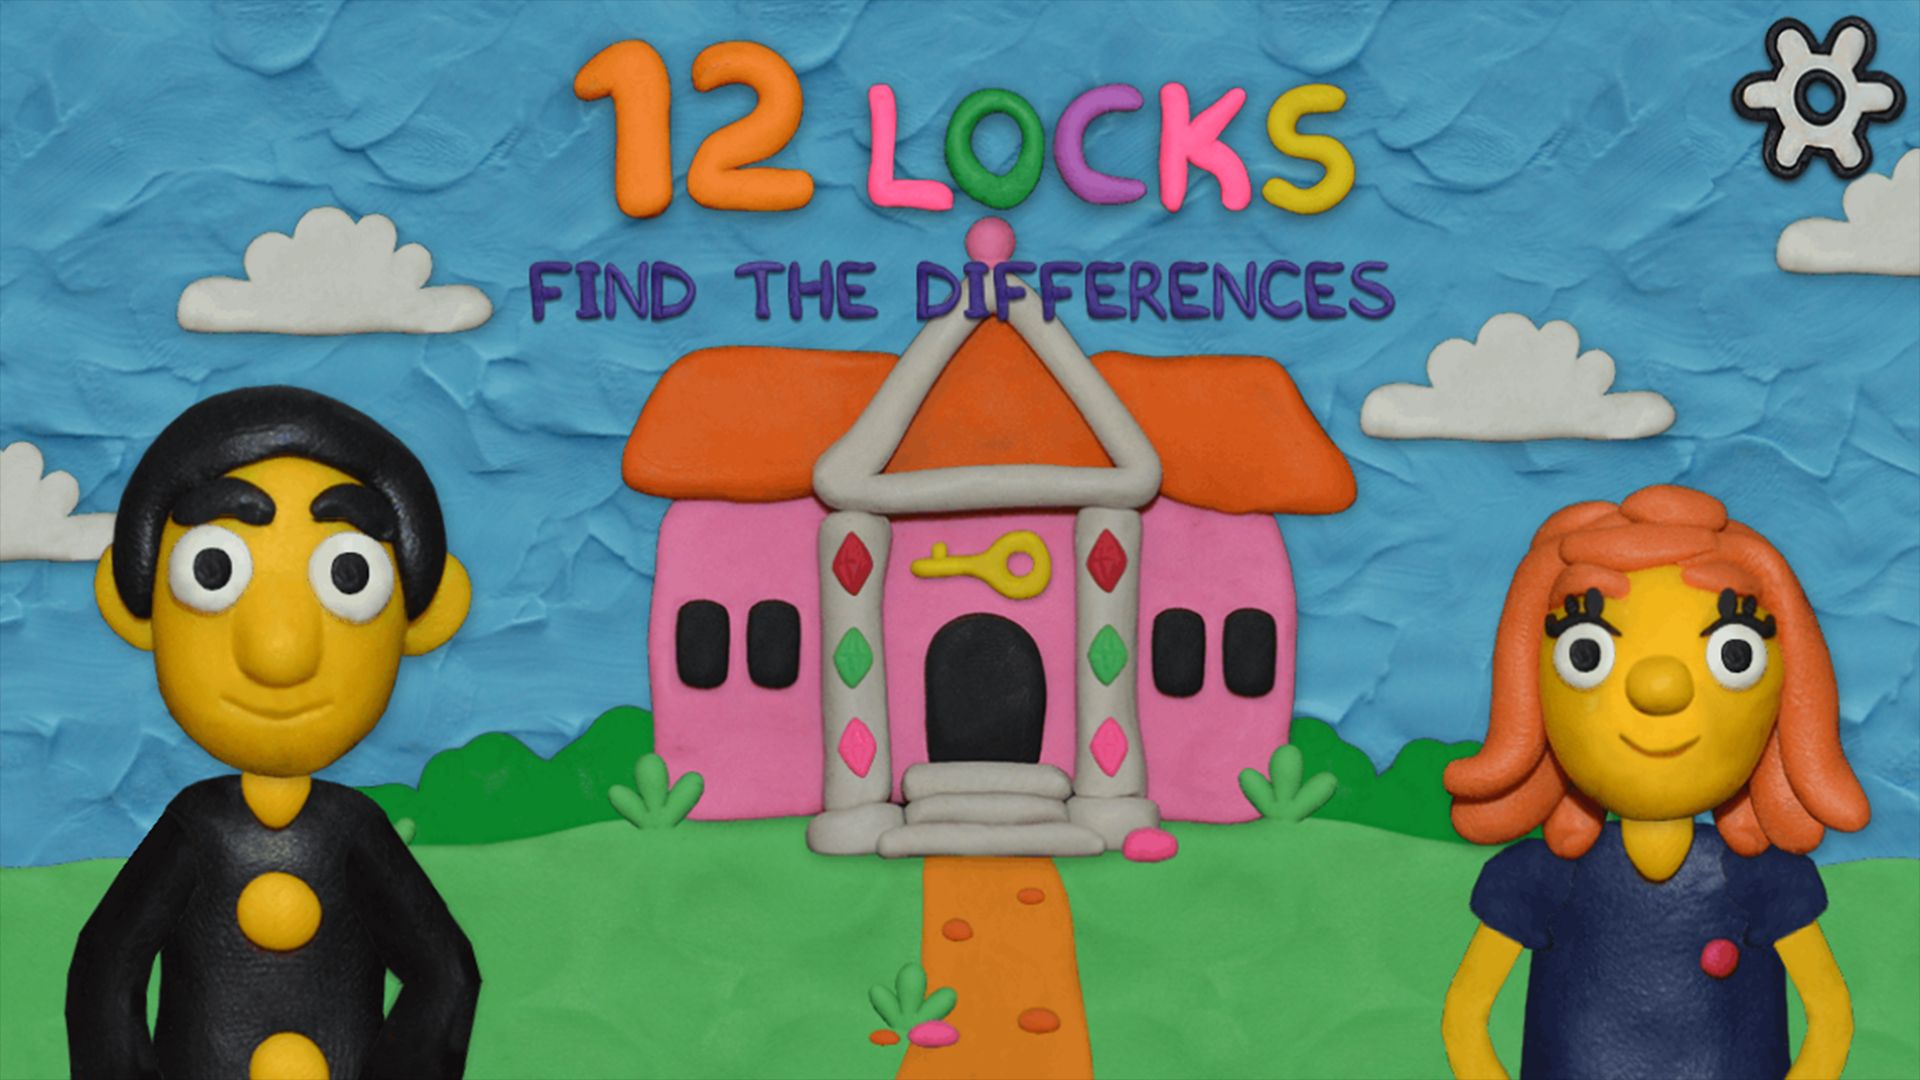 12 Locks Find the differences for Android